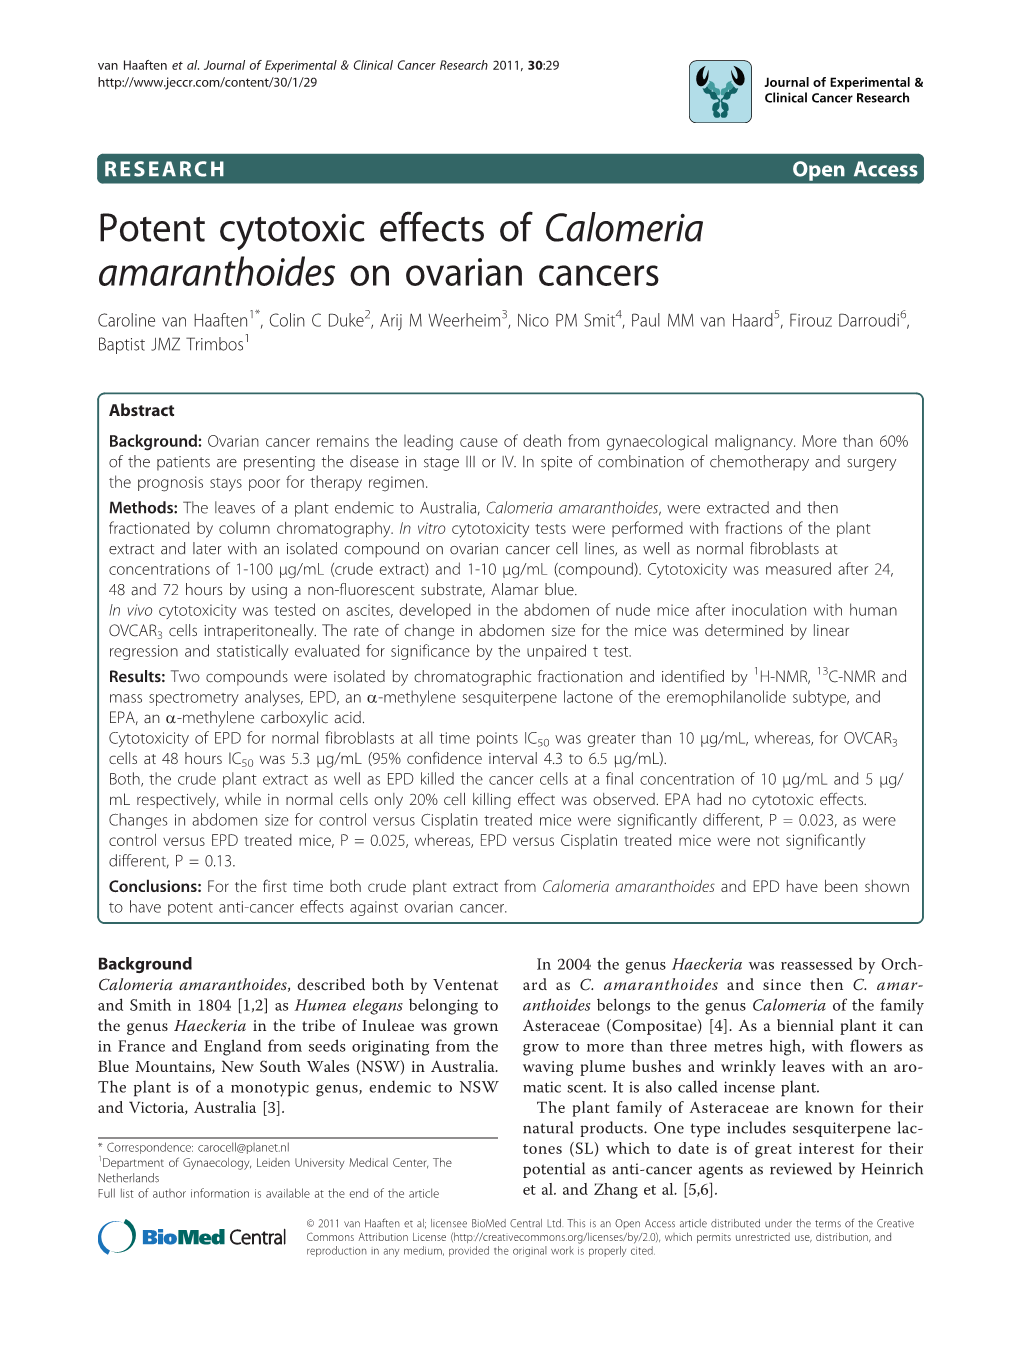 Potent Cytotoxic Effects of Calomeria Amaranthoides on Ovarian Cancers